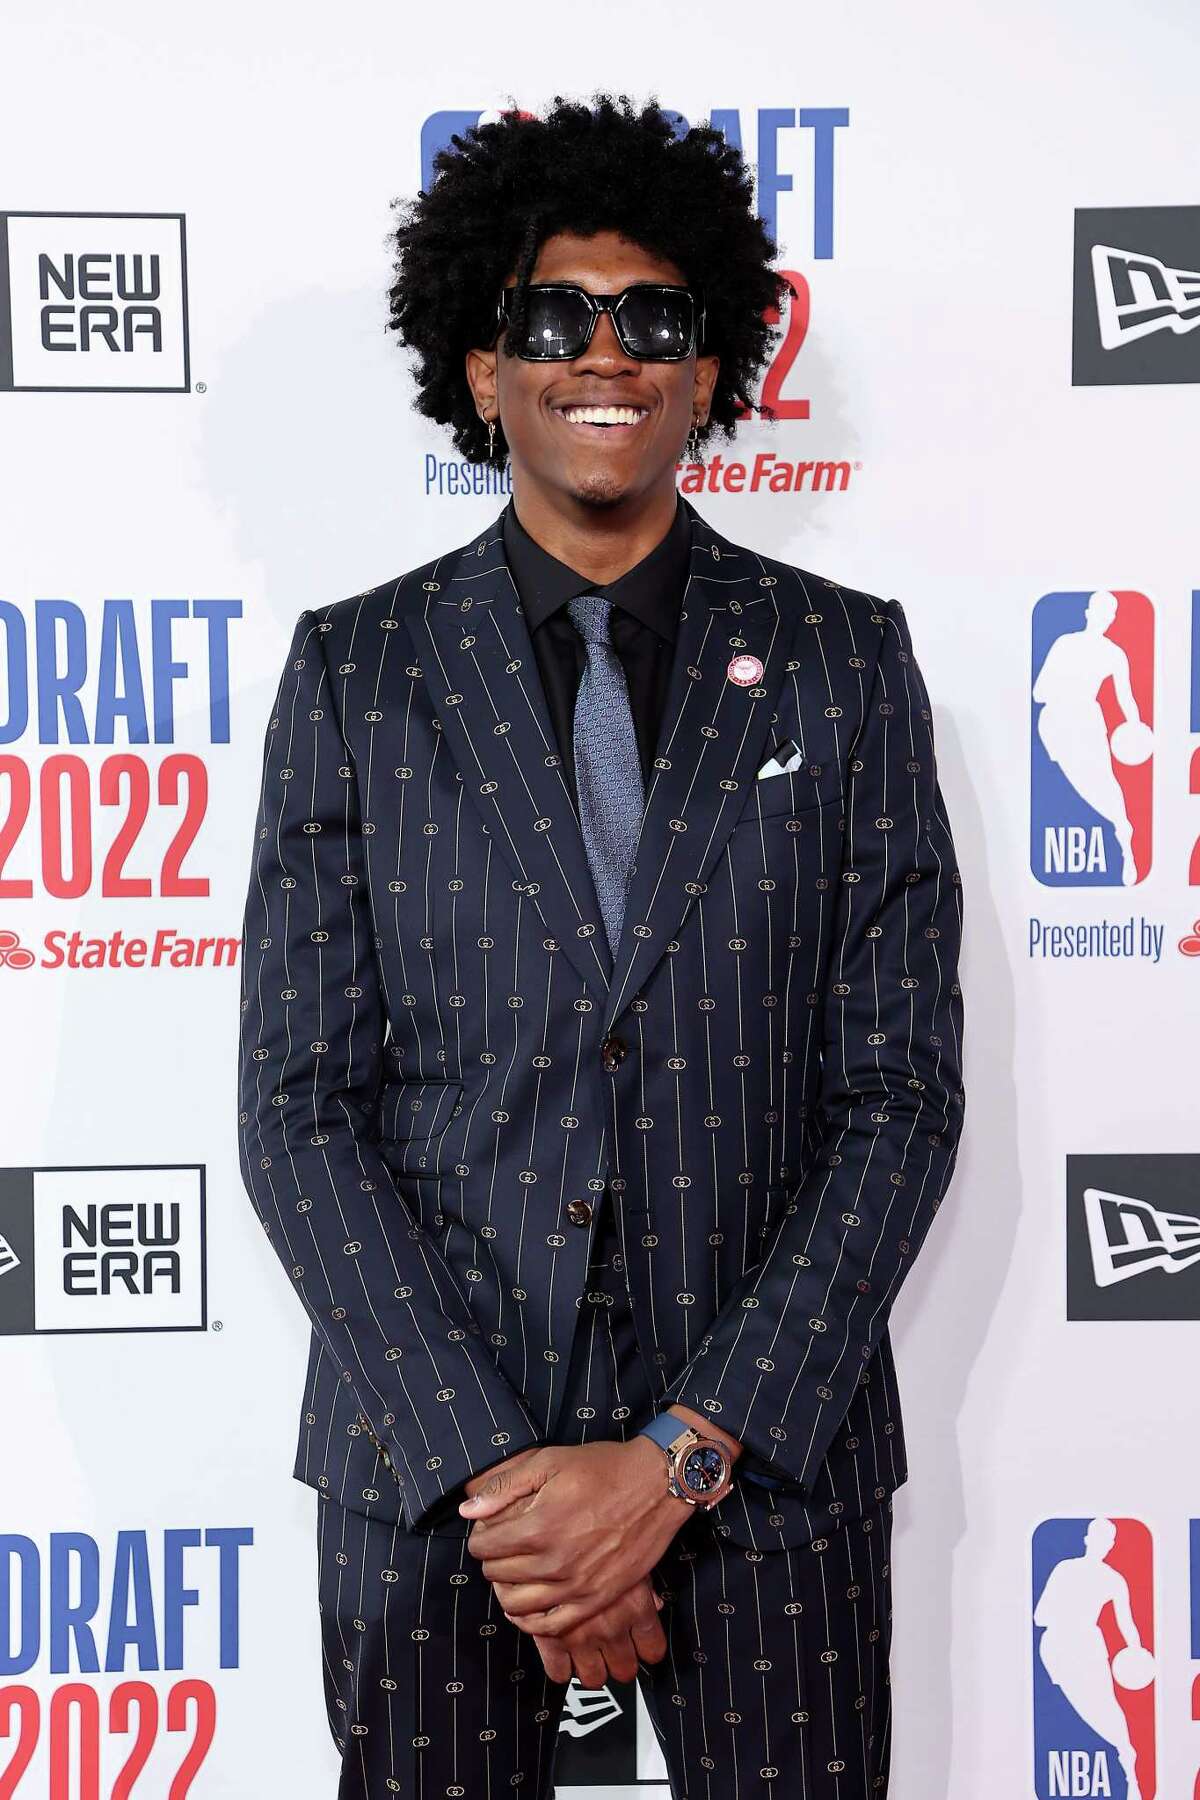 Jalen Williams poses for photos on the red carpet during the 2022 NBA Draft at Barclays Center on June 23, 2022 in New York City.